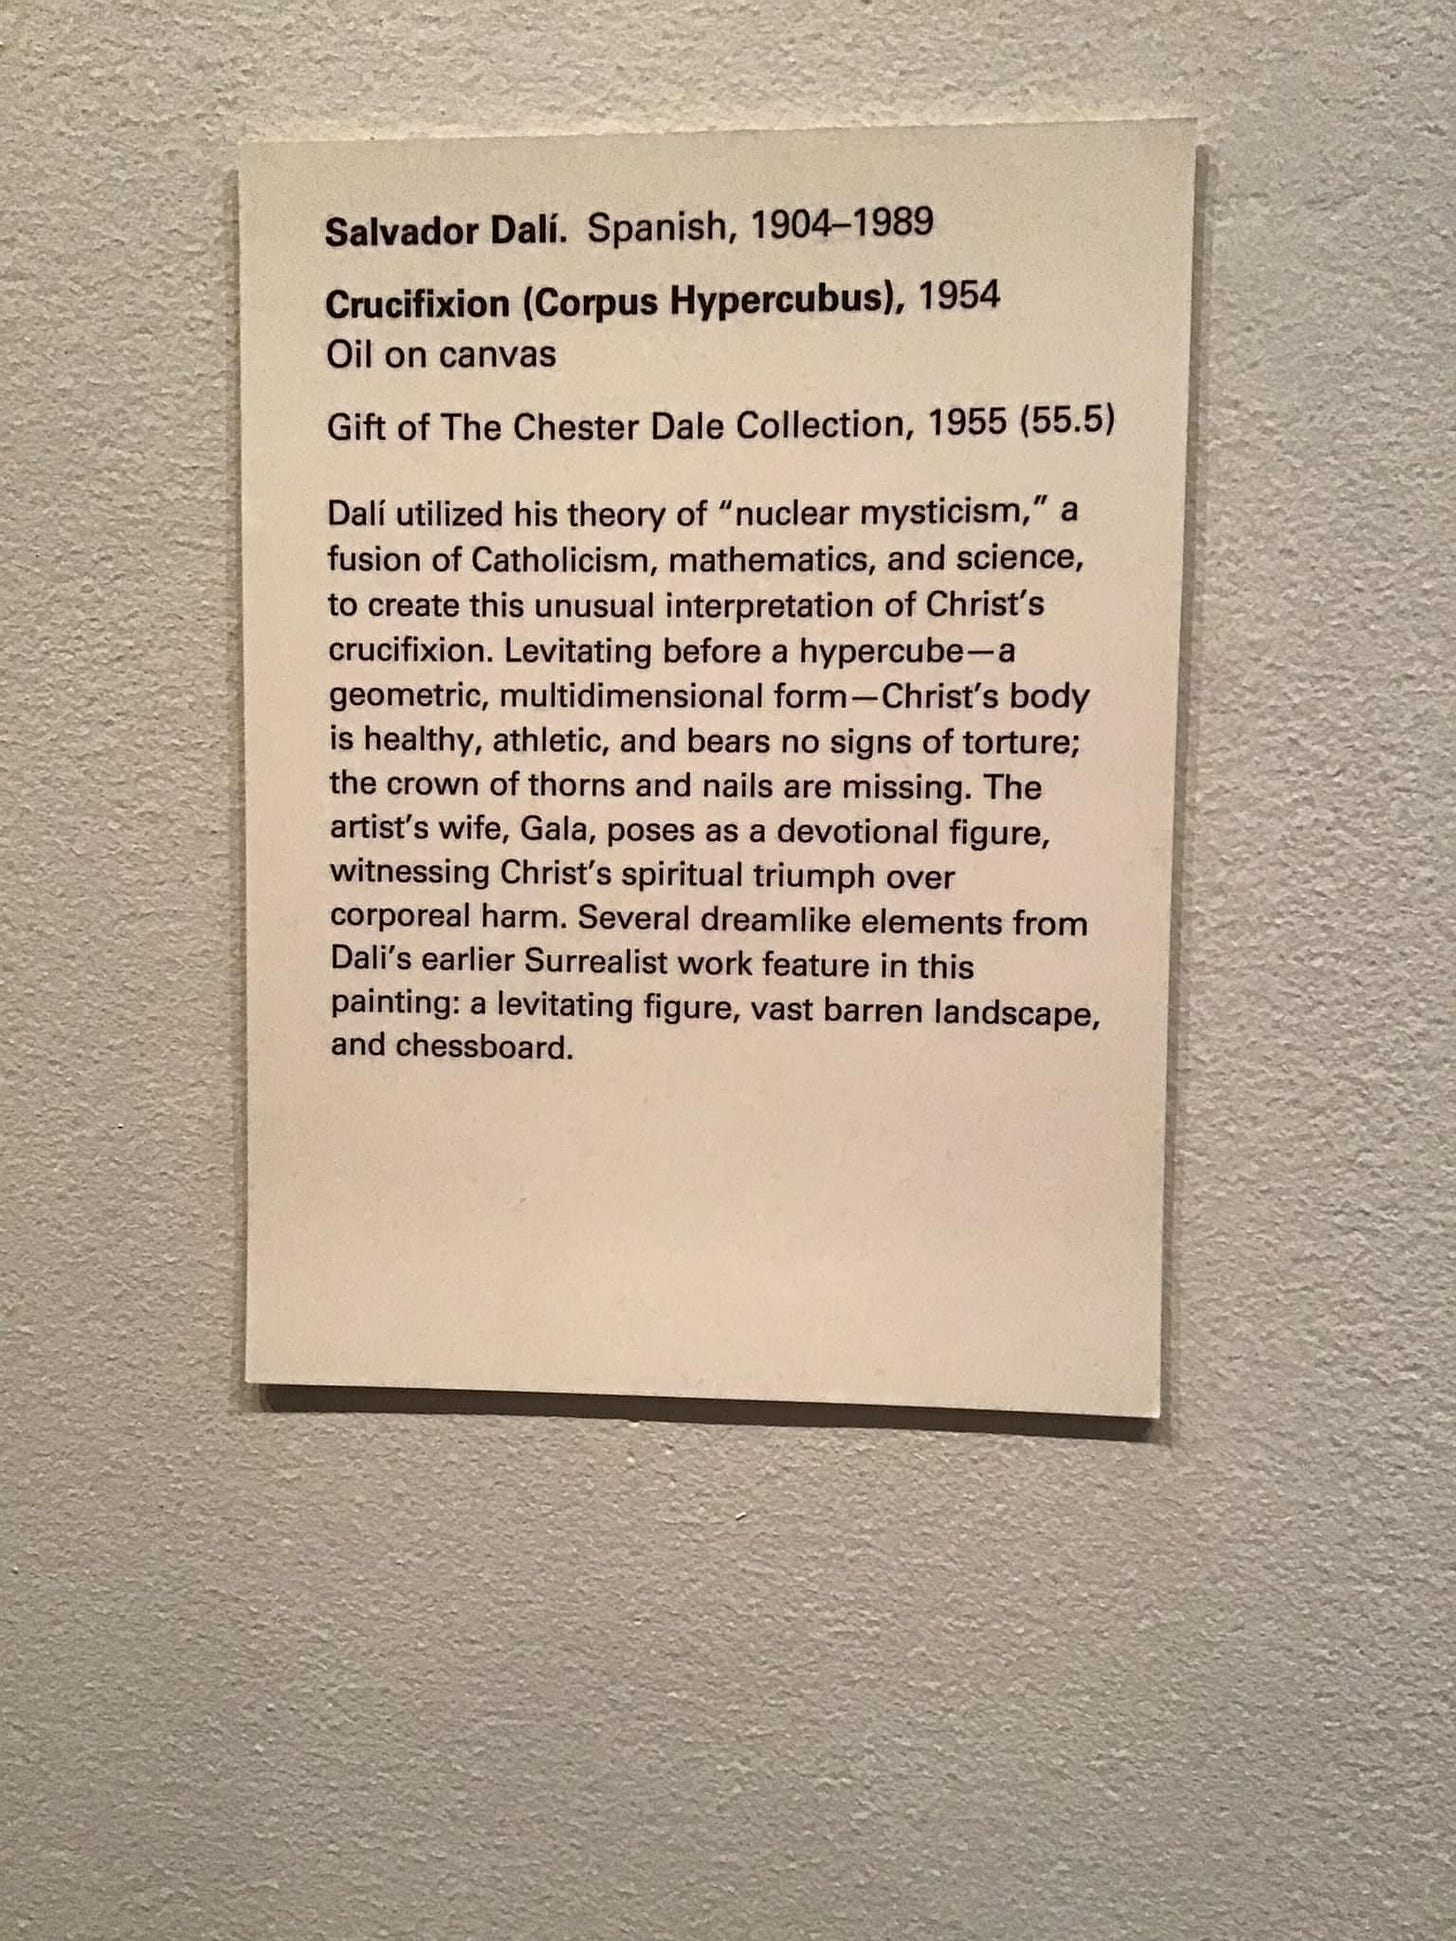 May be an image of text that says 'Salvador Dalí. Spanish, 1904-1989 Crucifixion (Corpus Hypercubus), 1954 Oil on canvas Gift of The Chester Dale Collection, 1955 (55.5) Dali utilized his theory of "nuclear mysticism, a fusion Catholicism, mathematics, and science, create this unusual interpretation of Christ's crucifixion. Levitating before hypercube-a geometric, multidimensional form- -Christ's body is healthy, athletic, and bears no signs of torture; the crown of thorns and nails are missing. The artist's wife, Gala, poses devotional figure, witnessing Christ's spiritual triumph over corporeal harm. Several dreamlike elements from Dali's earlier Surrealist work feature in this painting: levitating figure, vast barren landscape, and chessboard.'